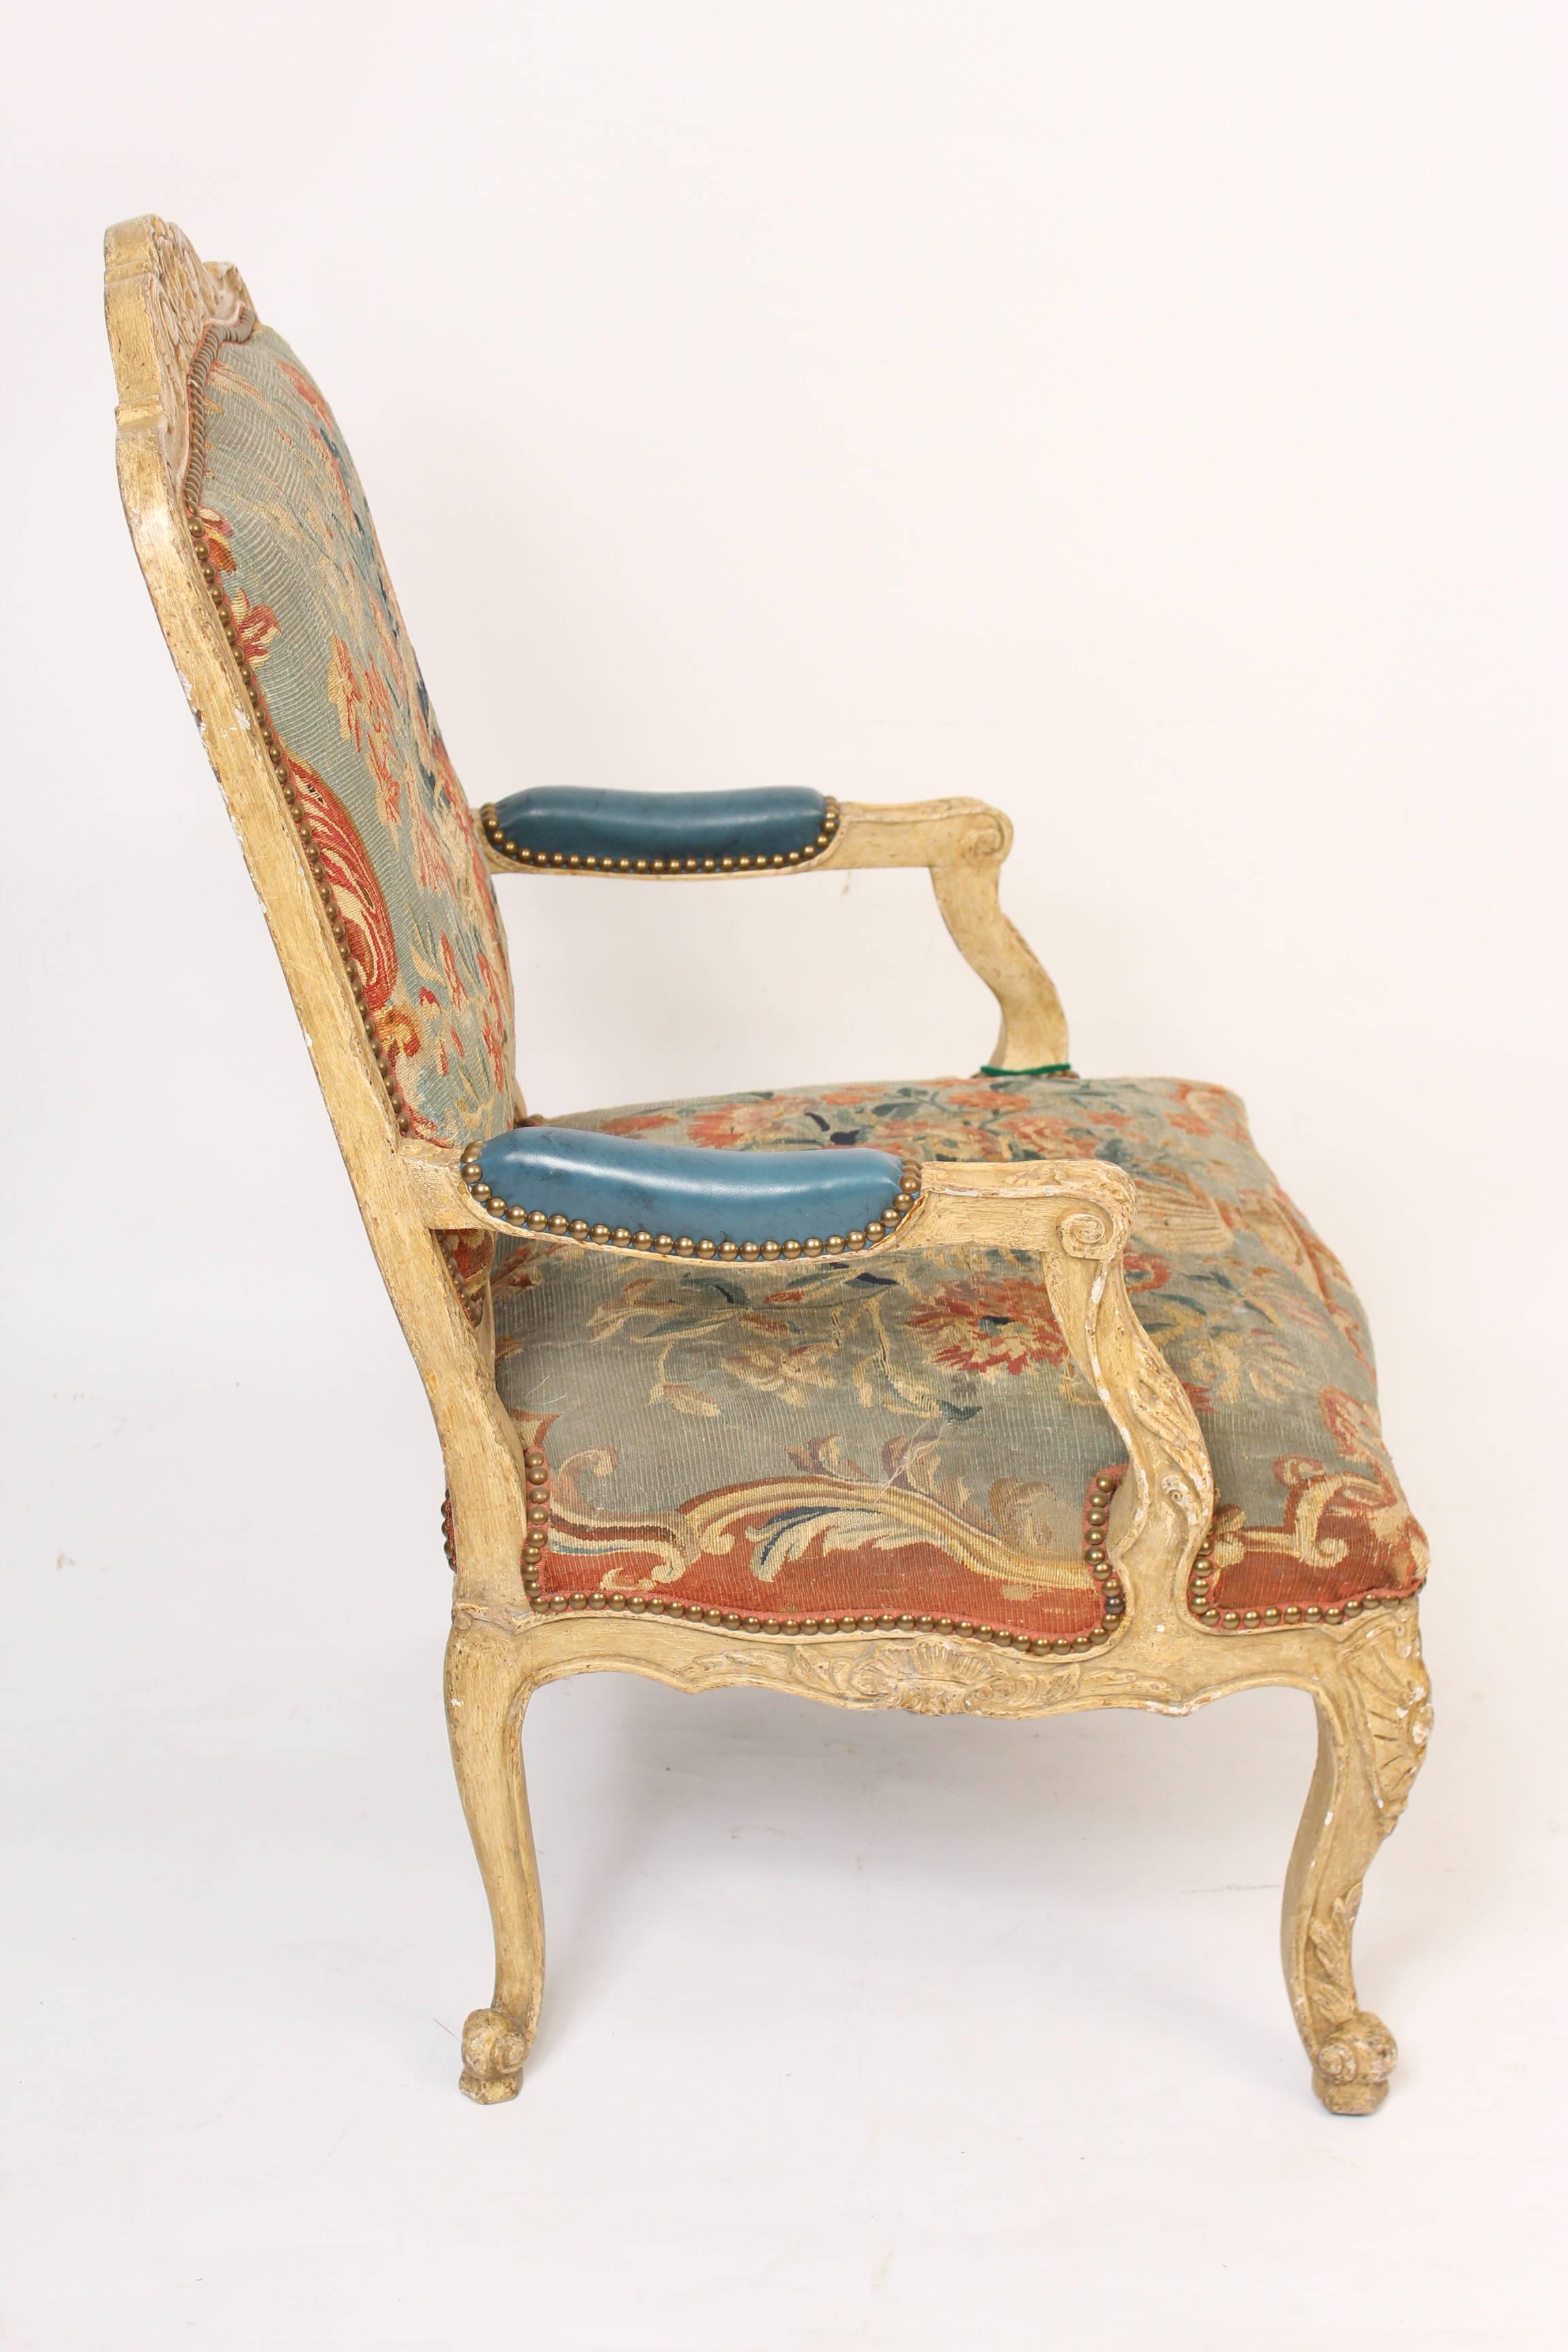 Louis XV style armchair frame with Minton Spidel label, late 20th century, with 19th century tapestry upholstery.